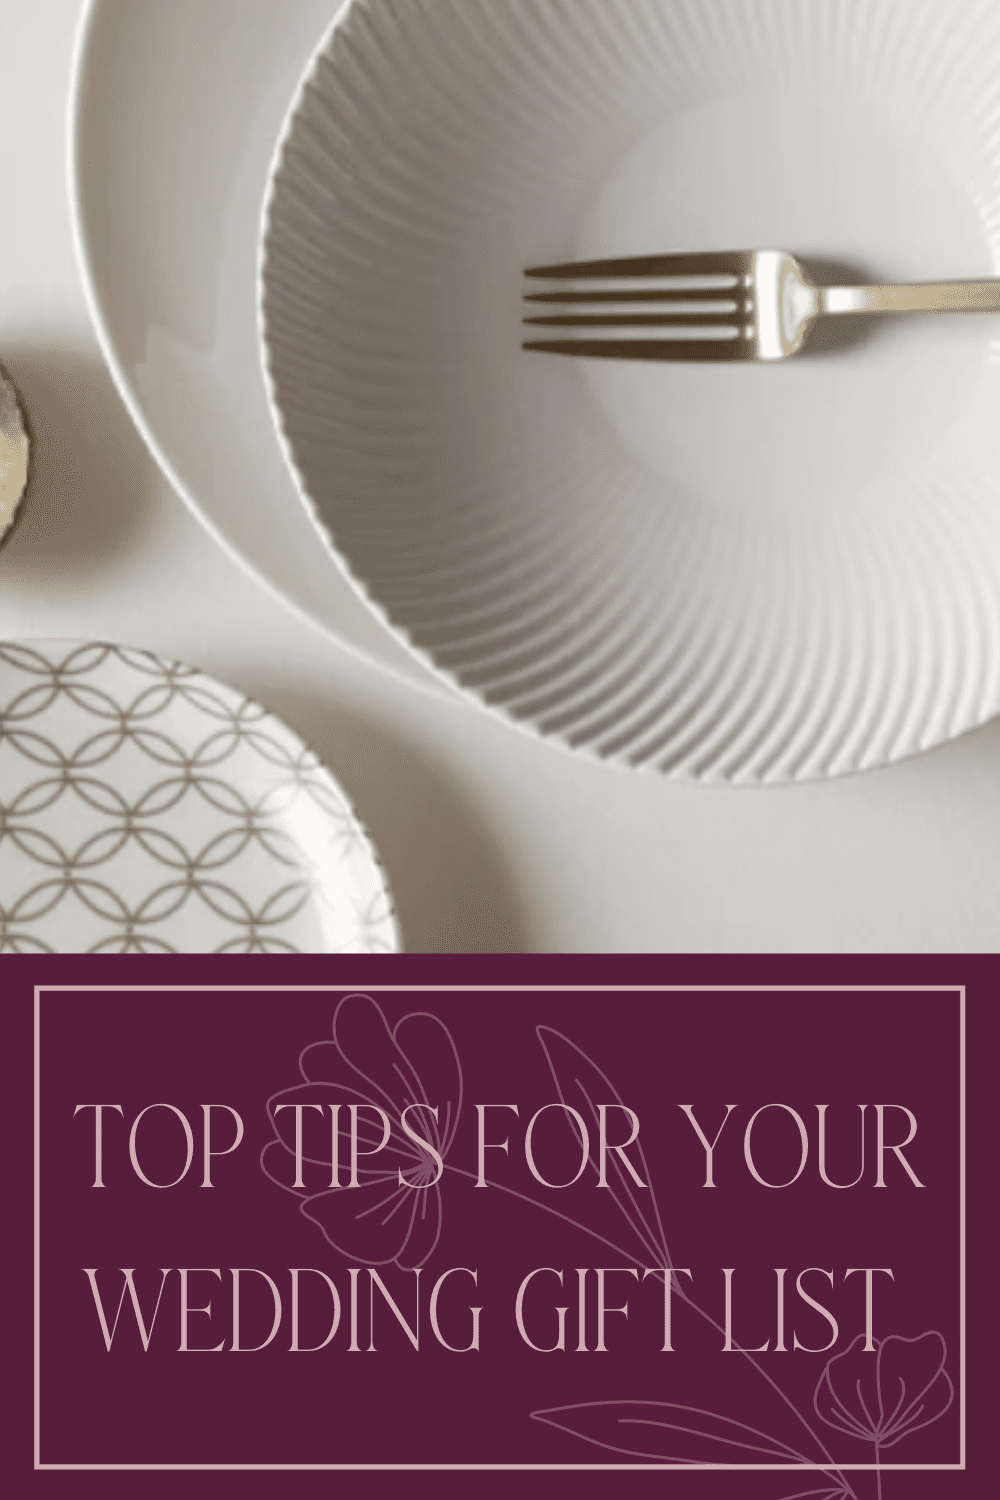 Top Tips For Your Wedding Gift List By Denby Pottery